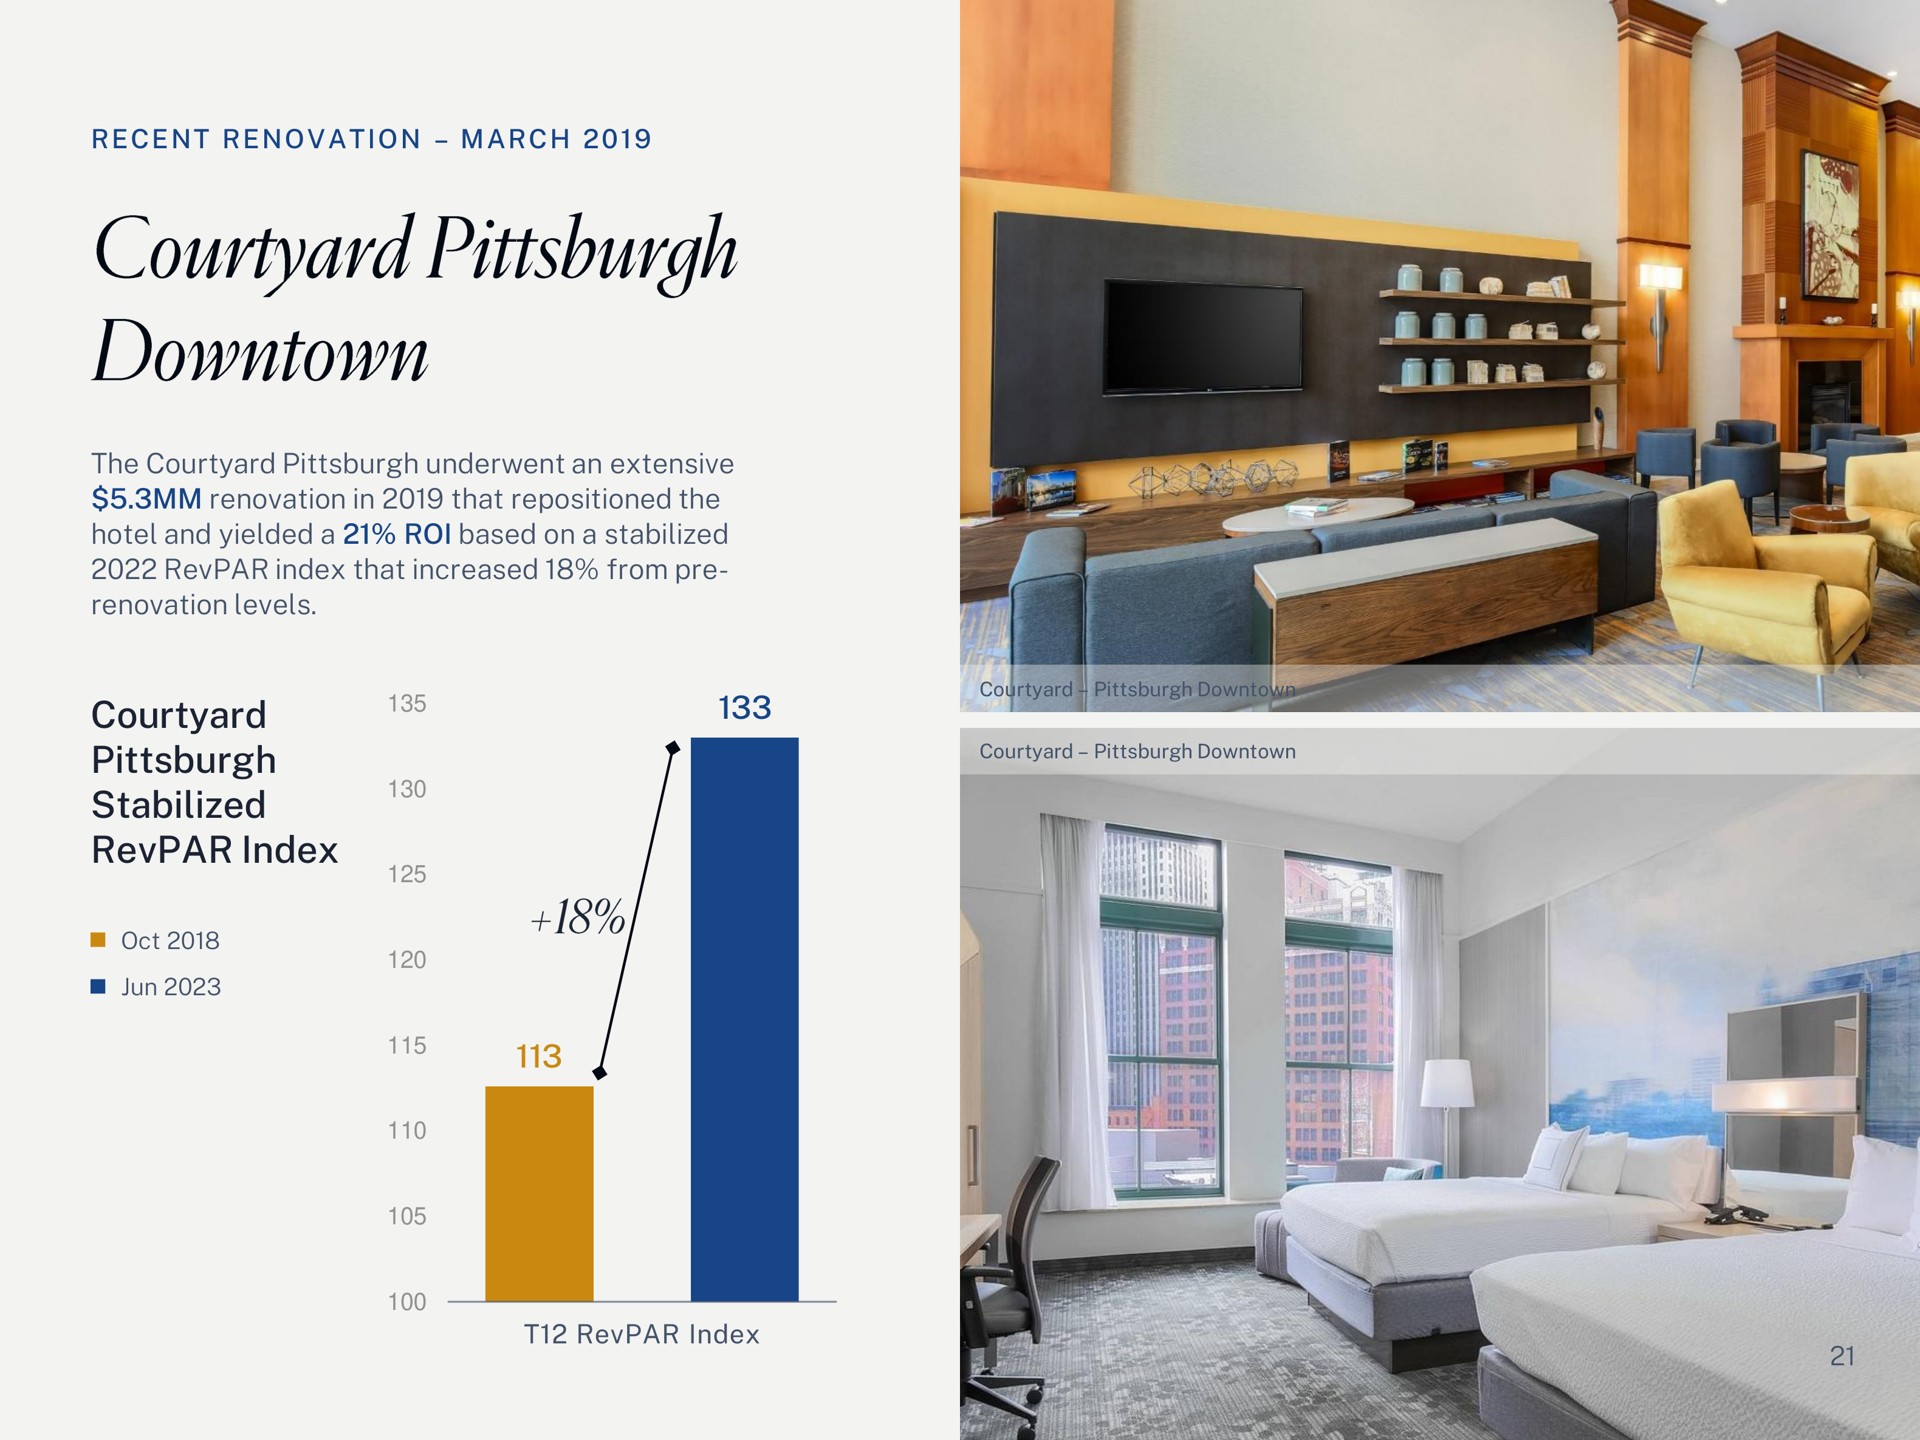 march the courtyard underwent an extensive renovation in that repositioned the hotel and yielded a roi based on a stabilized index that increased from renovation levels courtyard stabilized index index downtown | Summit Hotel Properties